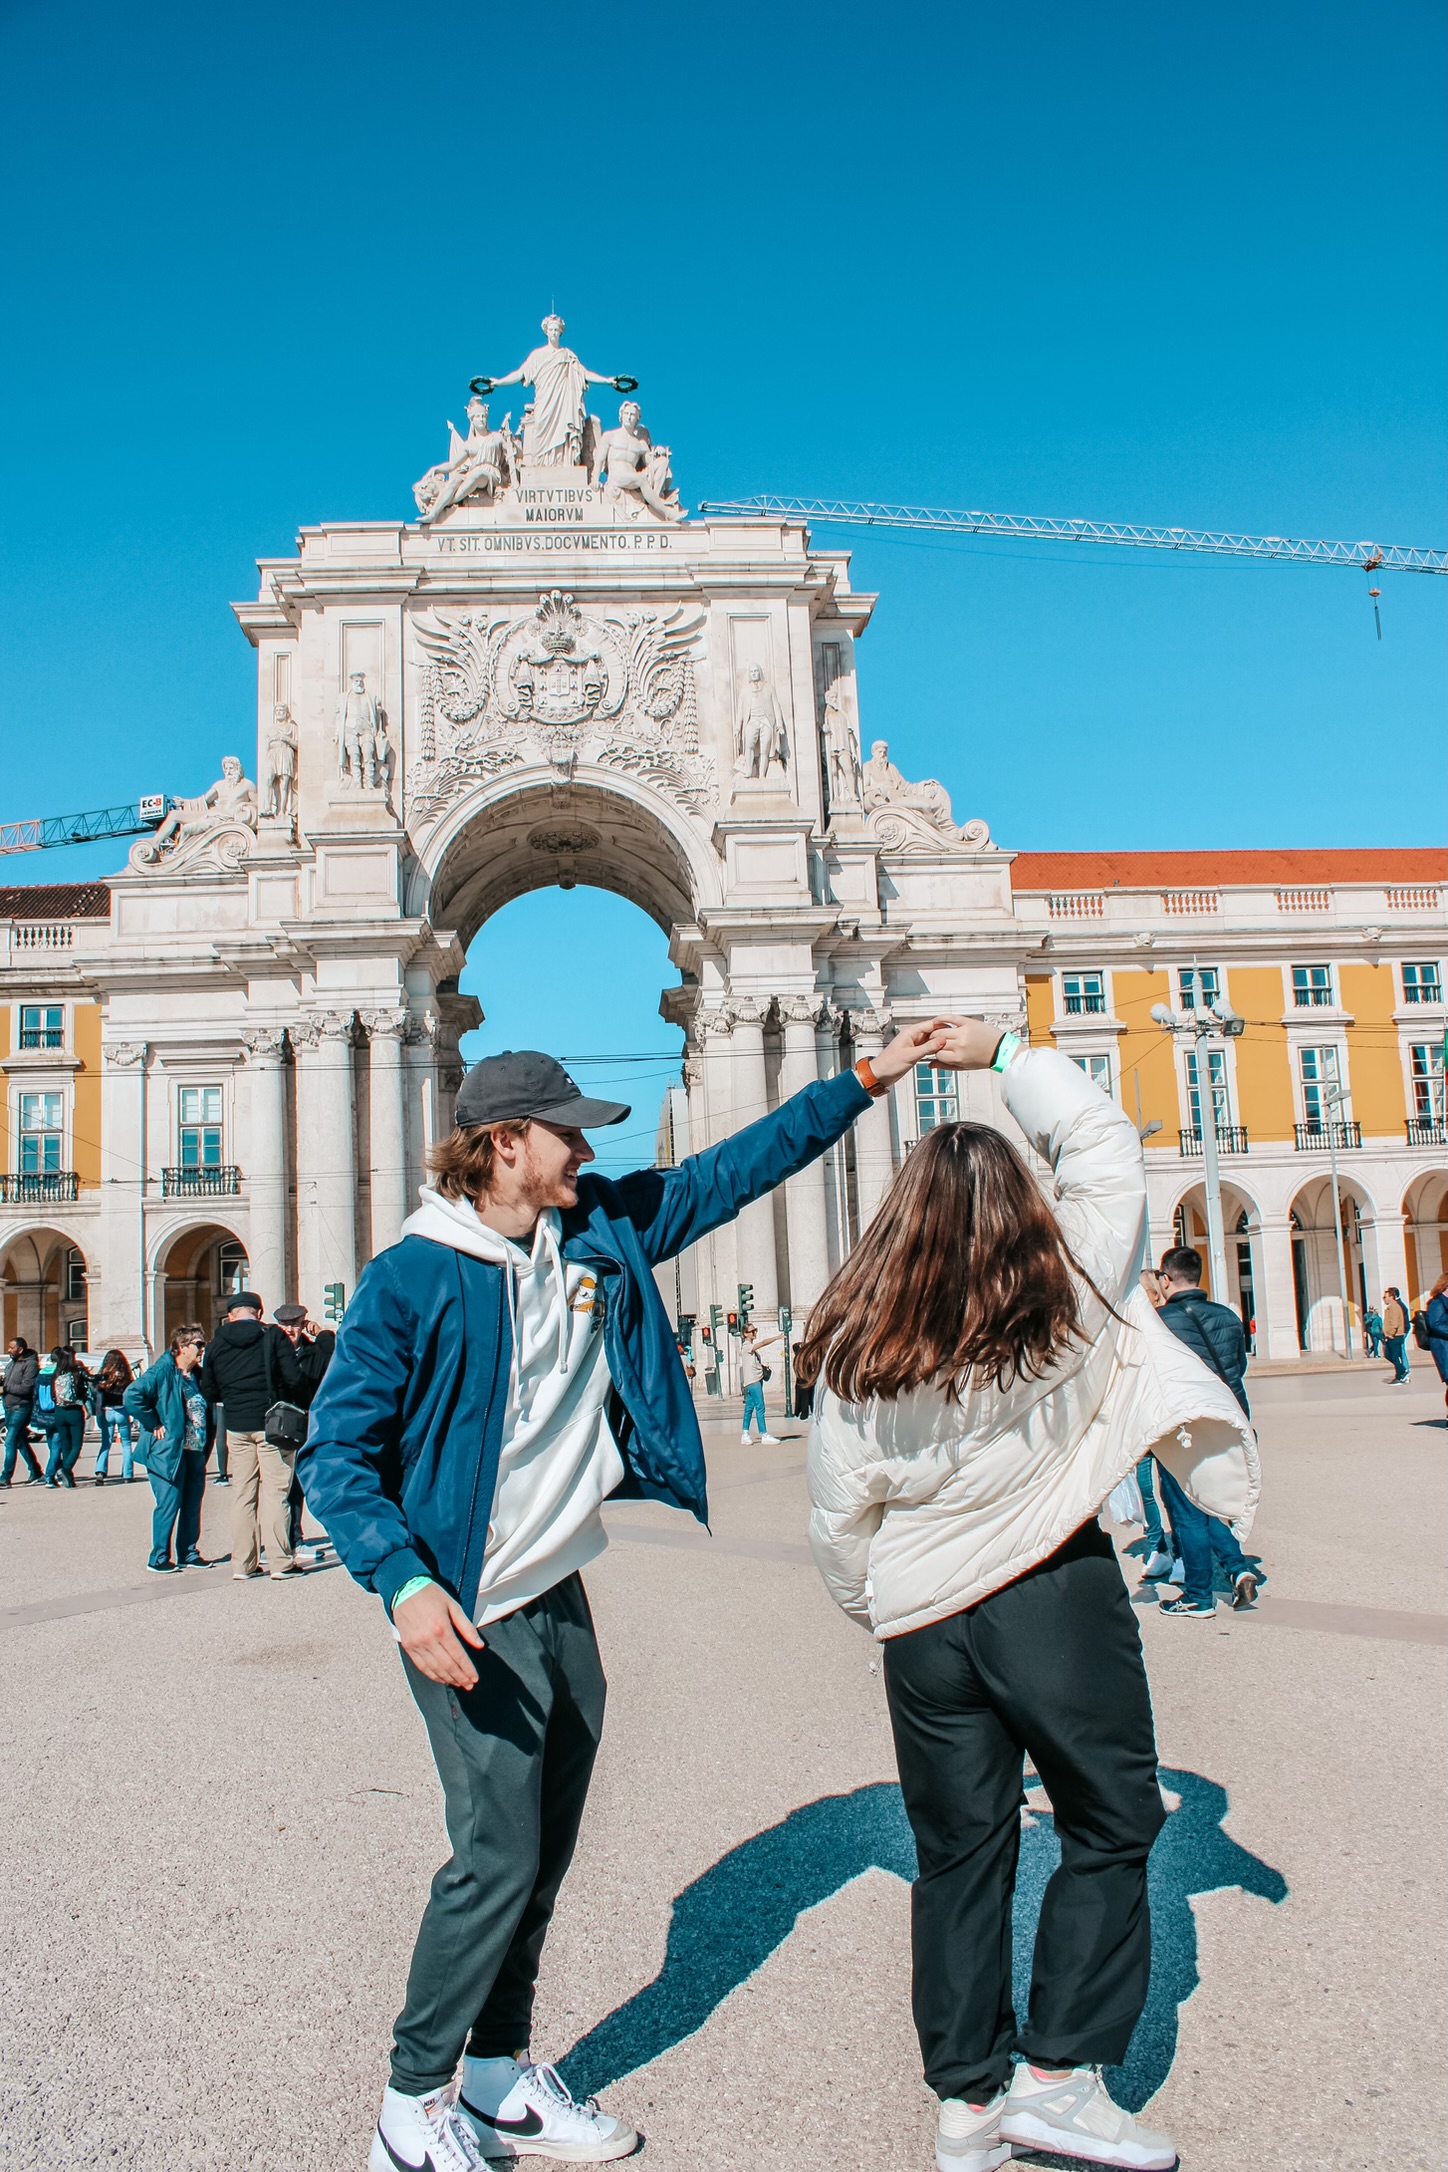 Woman in white jacket twirling with man in black baseball cap and blue jacket in front of Arco da Rua Agusta